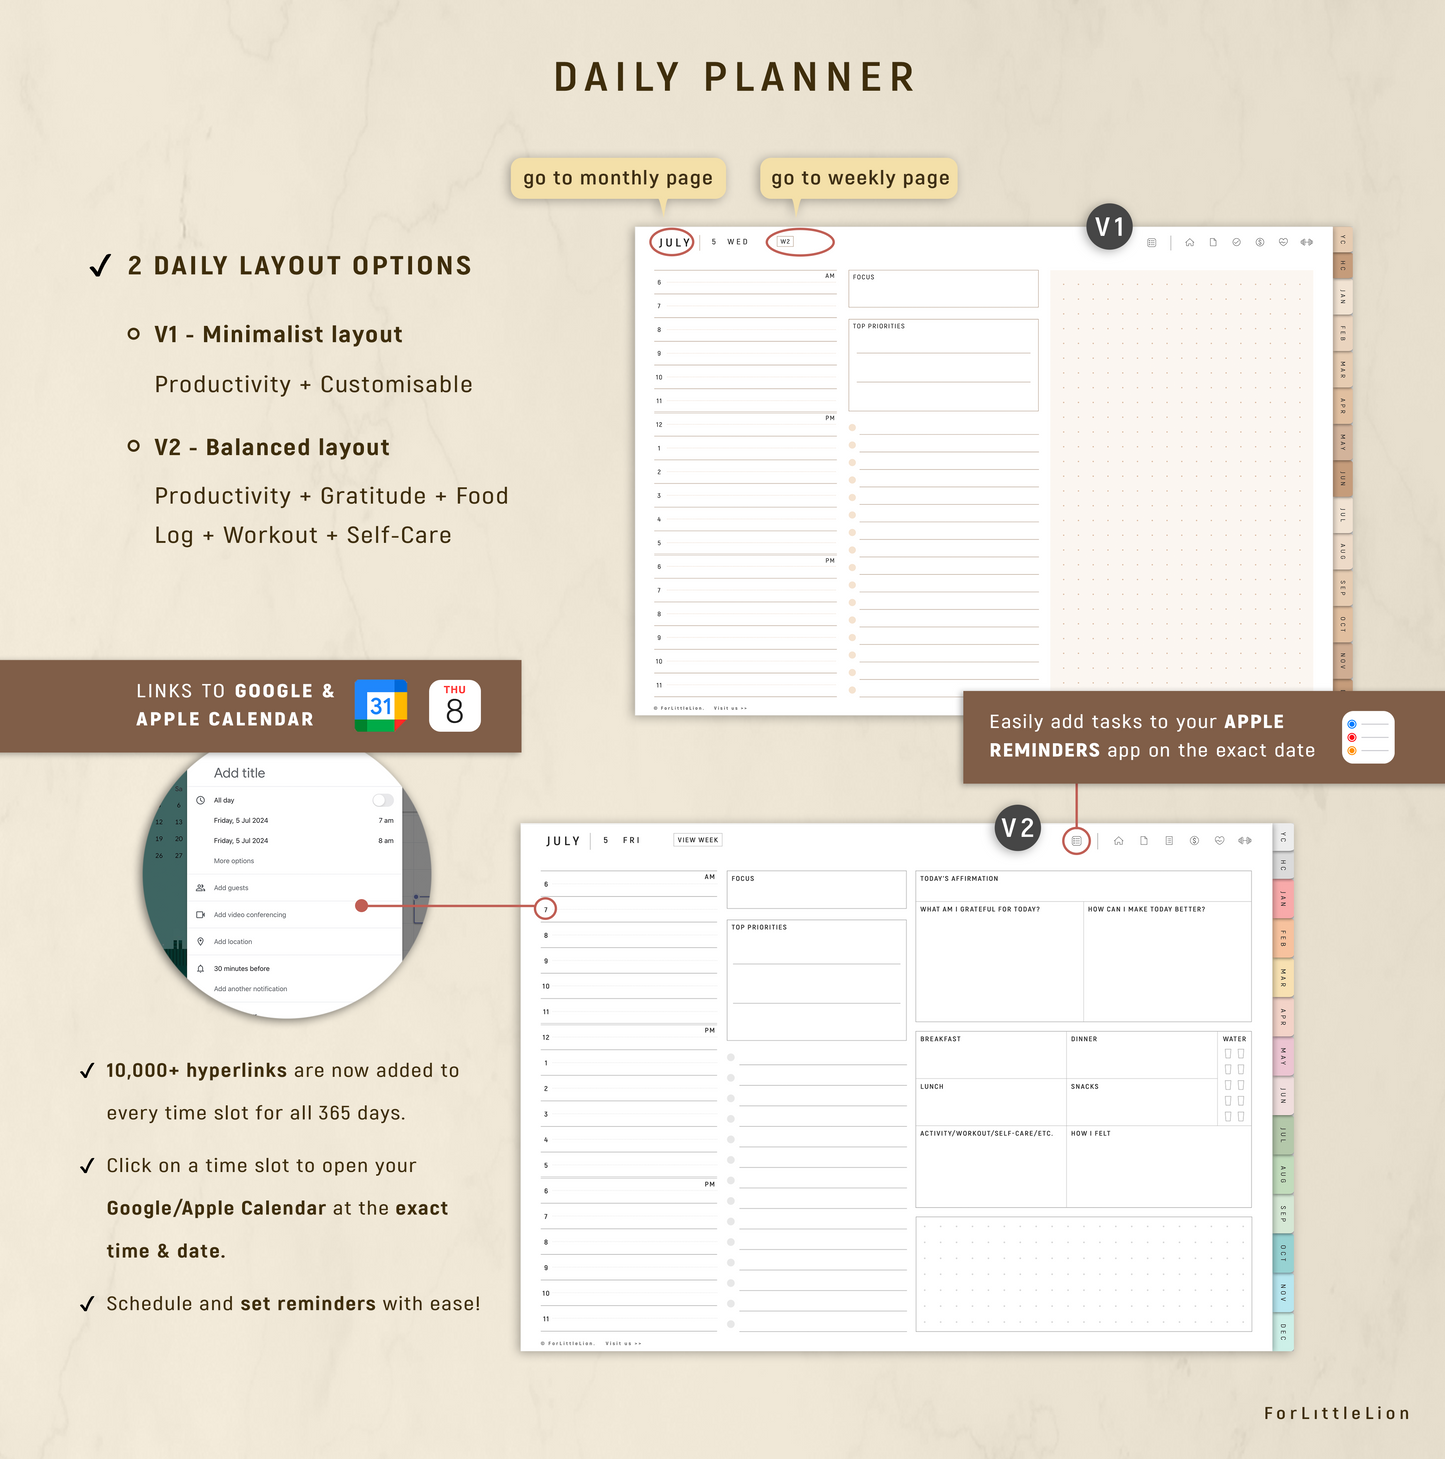 All-in-one Digital Planner 2025